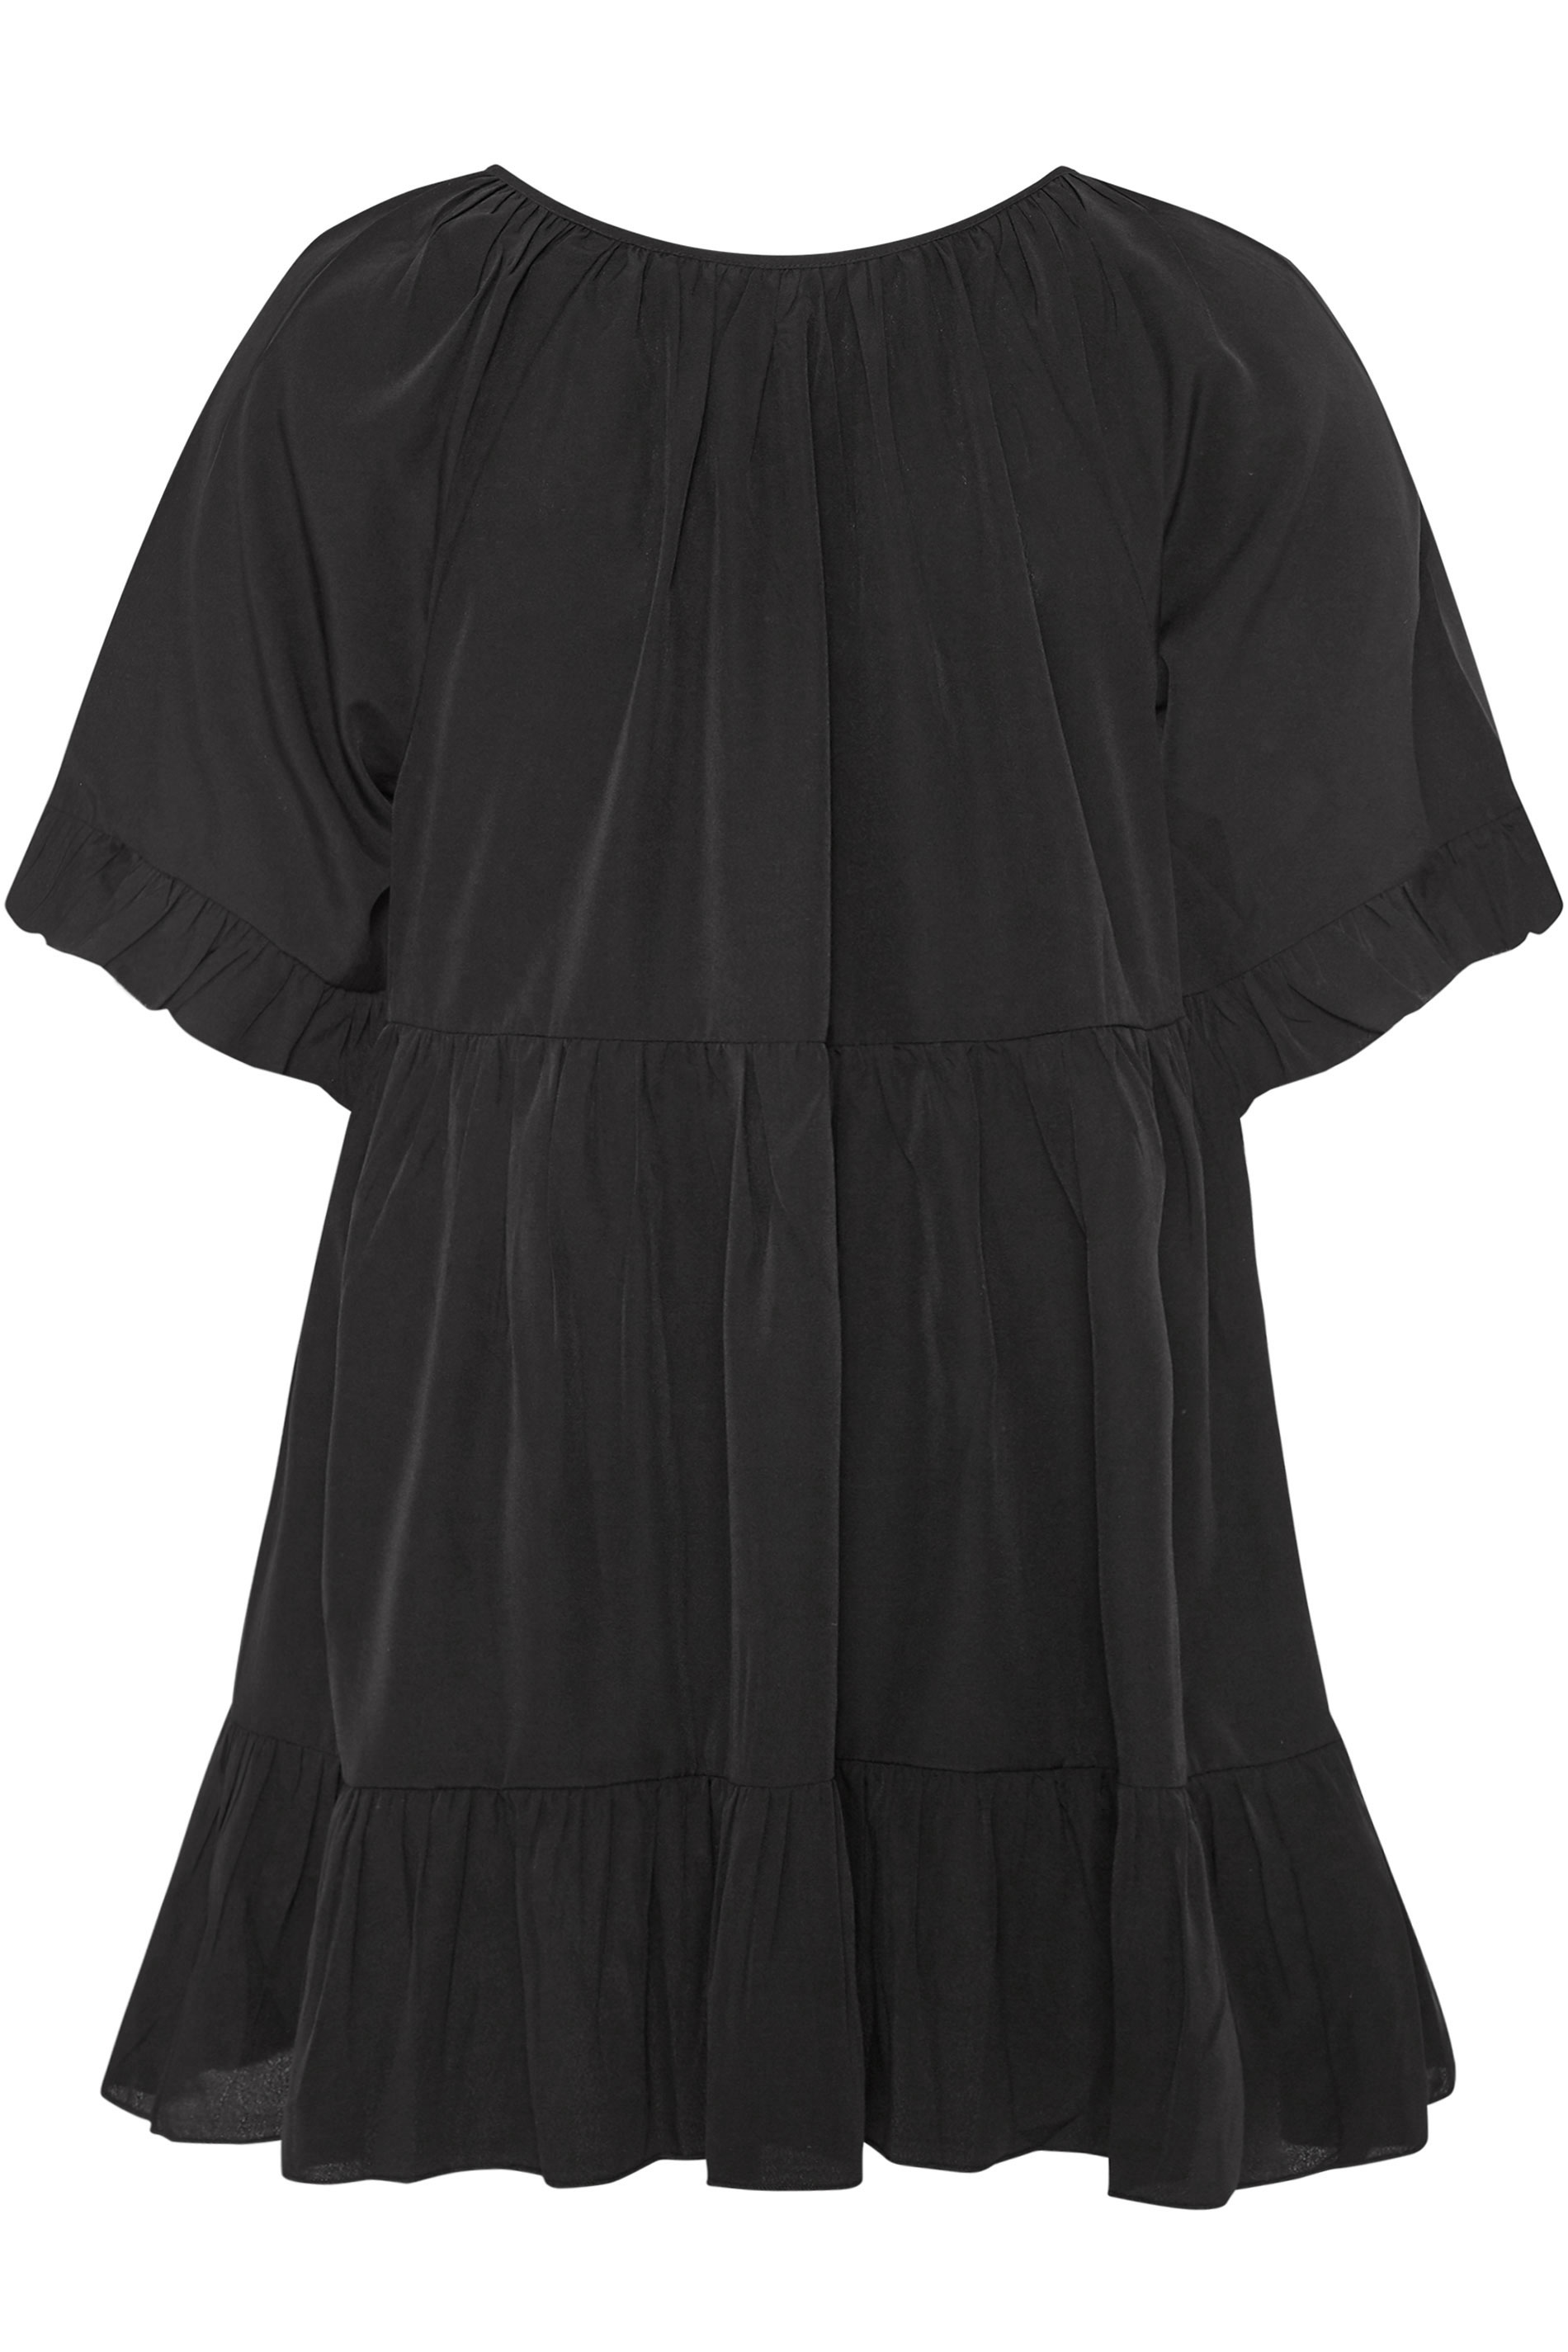 LIMITED COLLECTION Black Smock Tiered Blouse | Yours Clothing